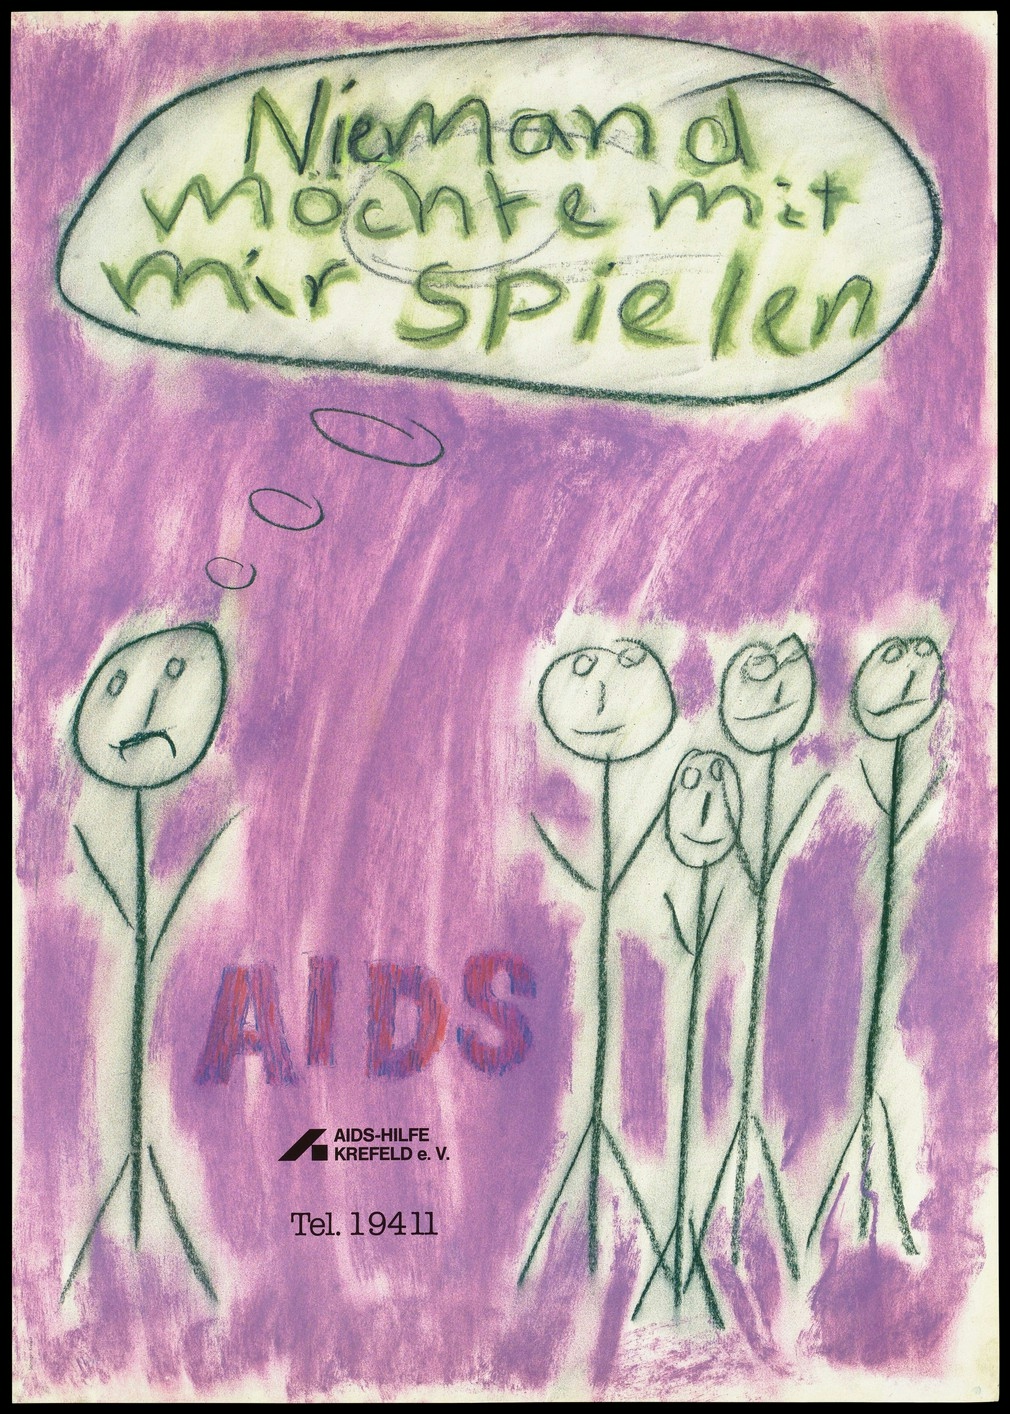 Poster depicting a group of four roughly drawn stick men in a group next to a single stick man on their own. German writing.